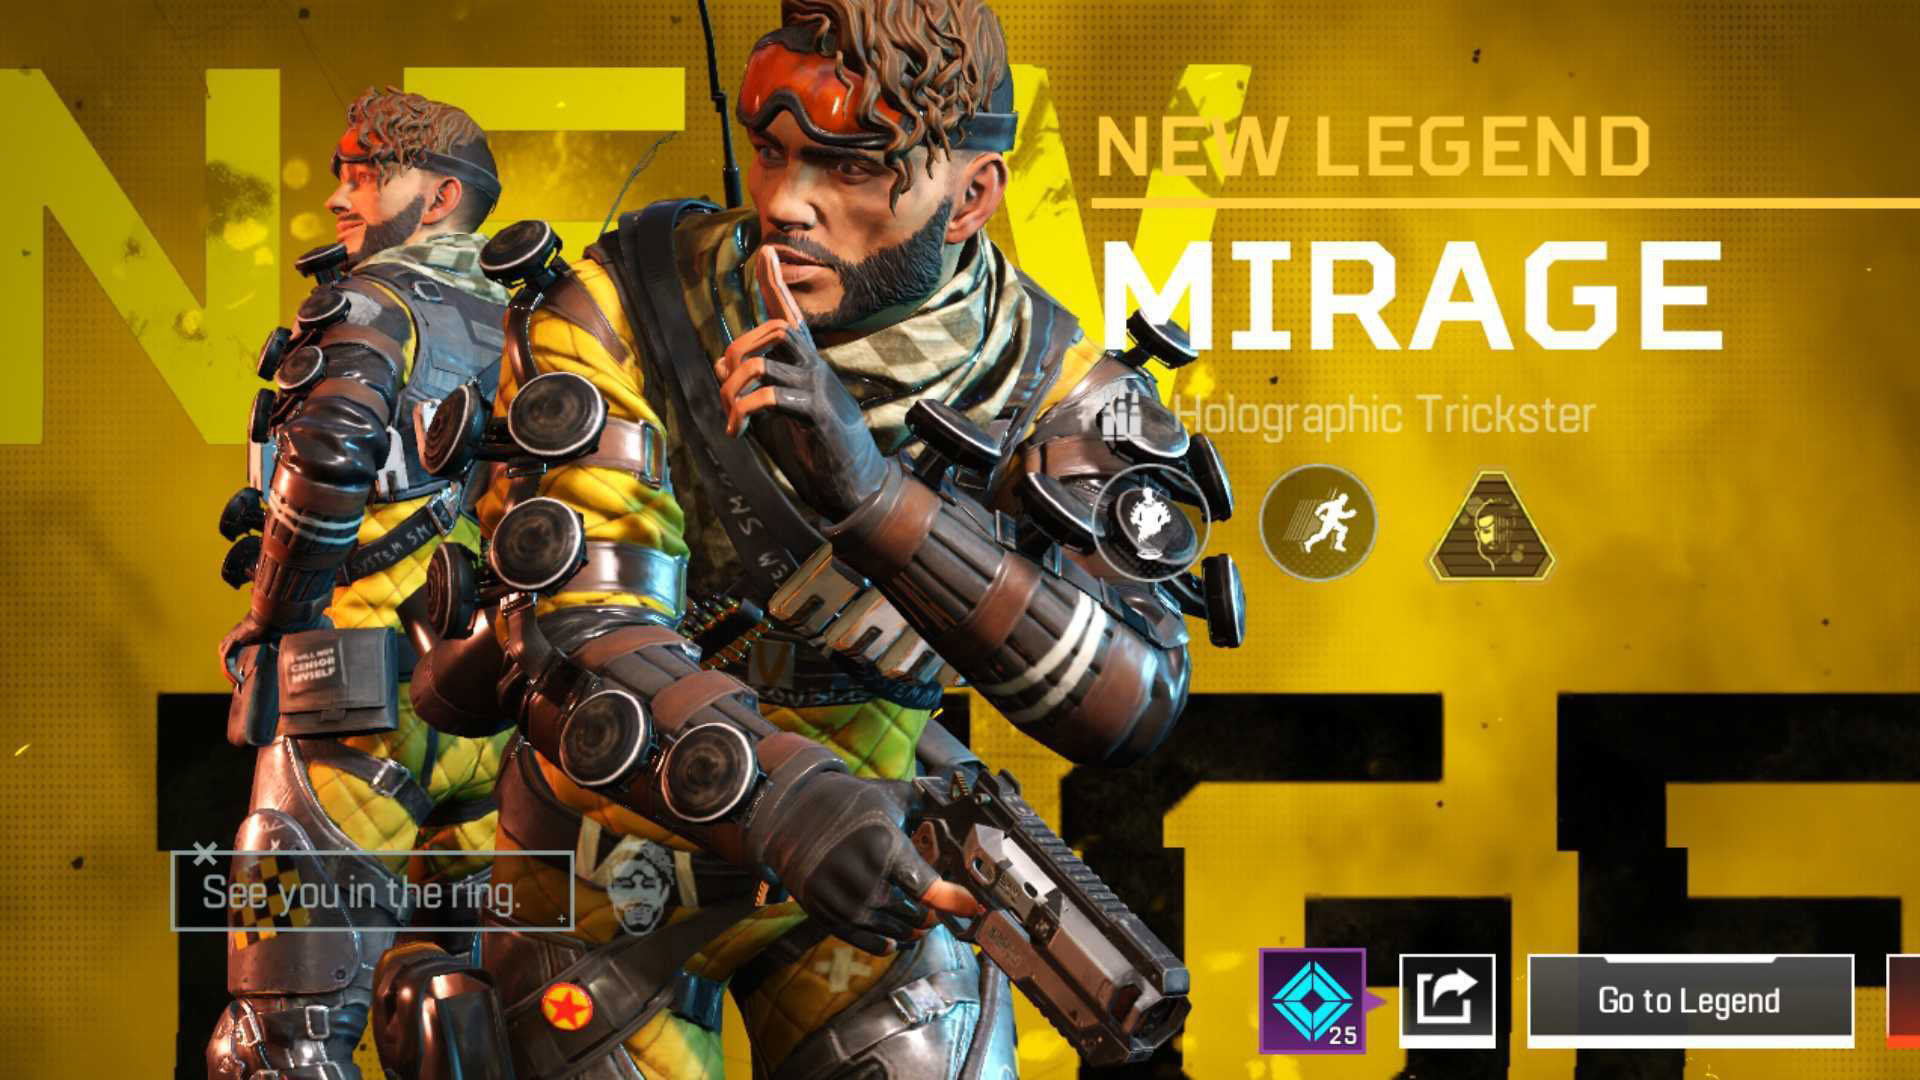 Apex Legends Mobile and upcoming Battlefield Mobile games have